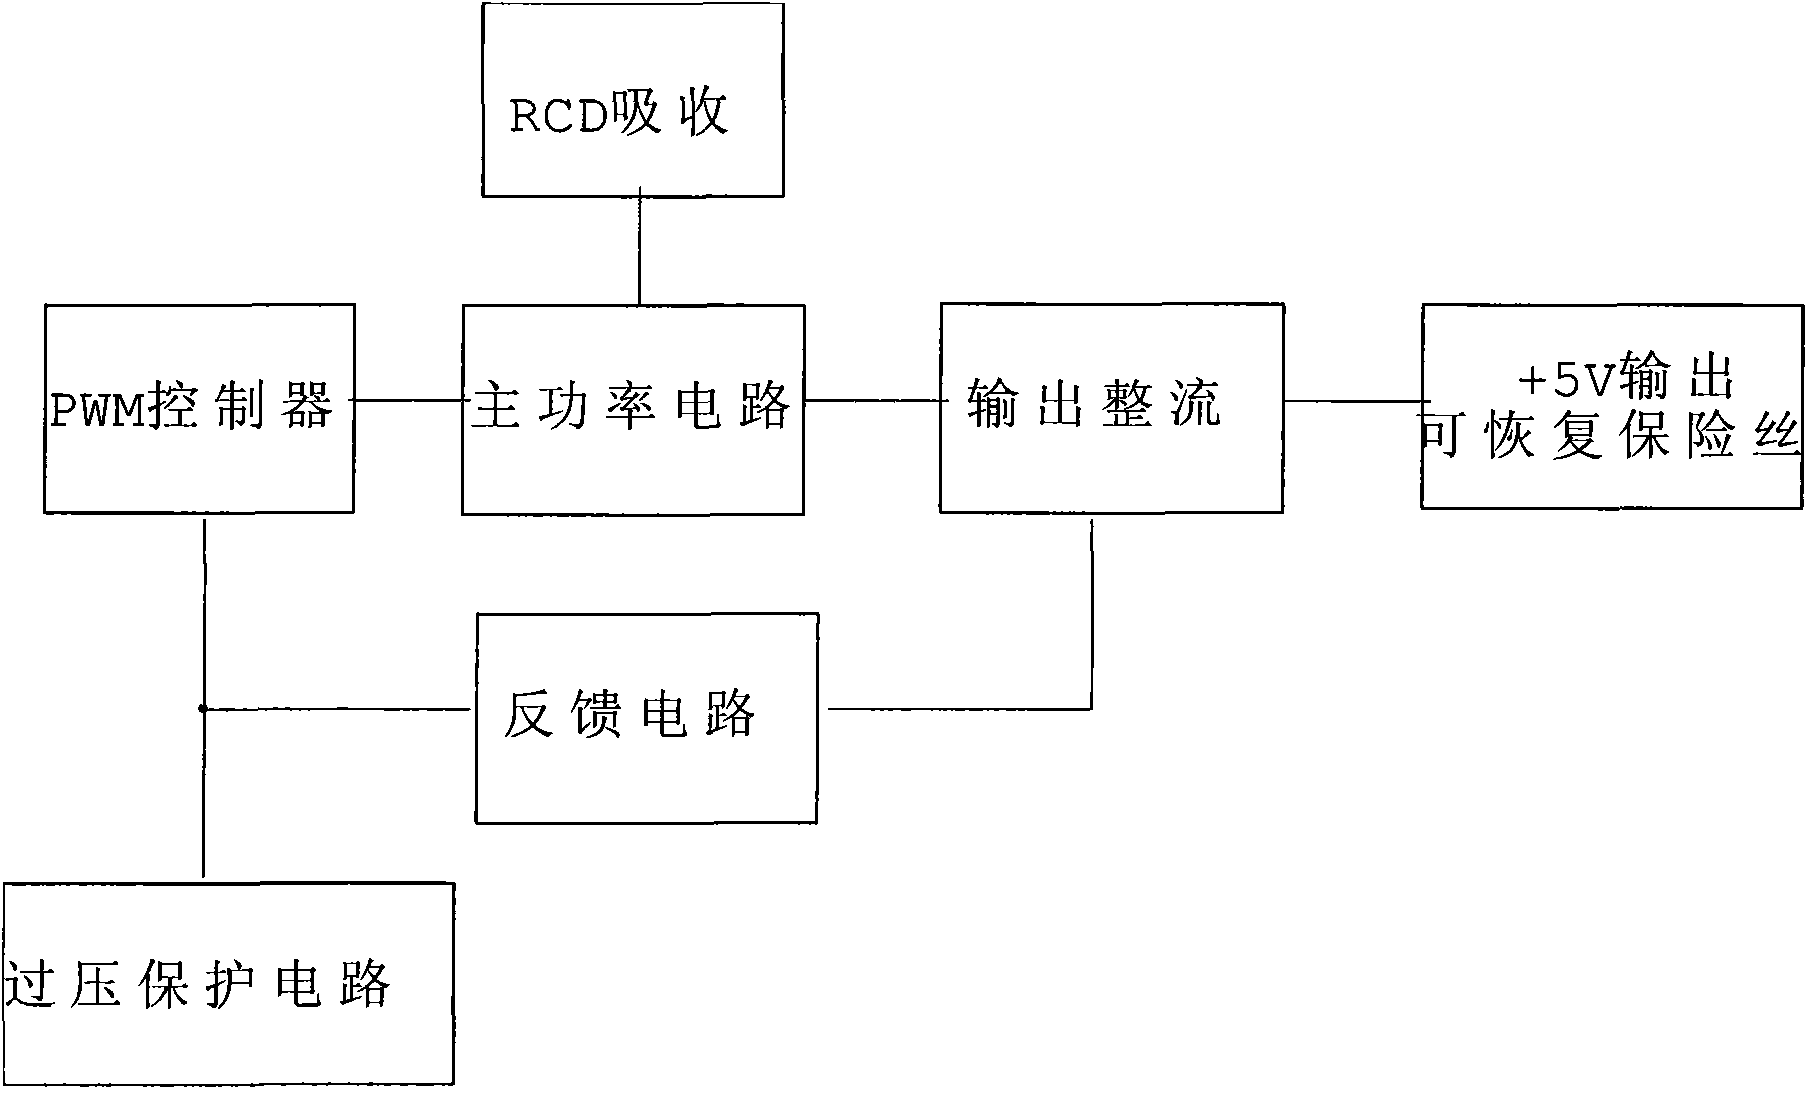 Short-circuit protection circuit for switching power supply of frequency converter